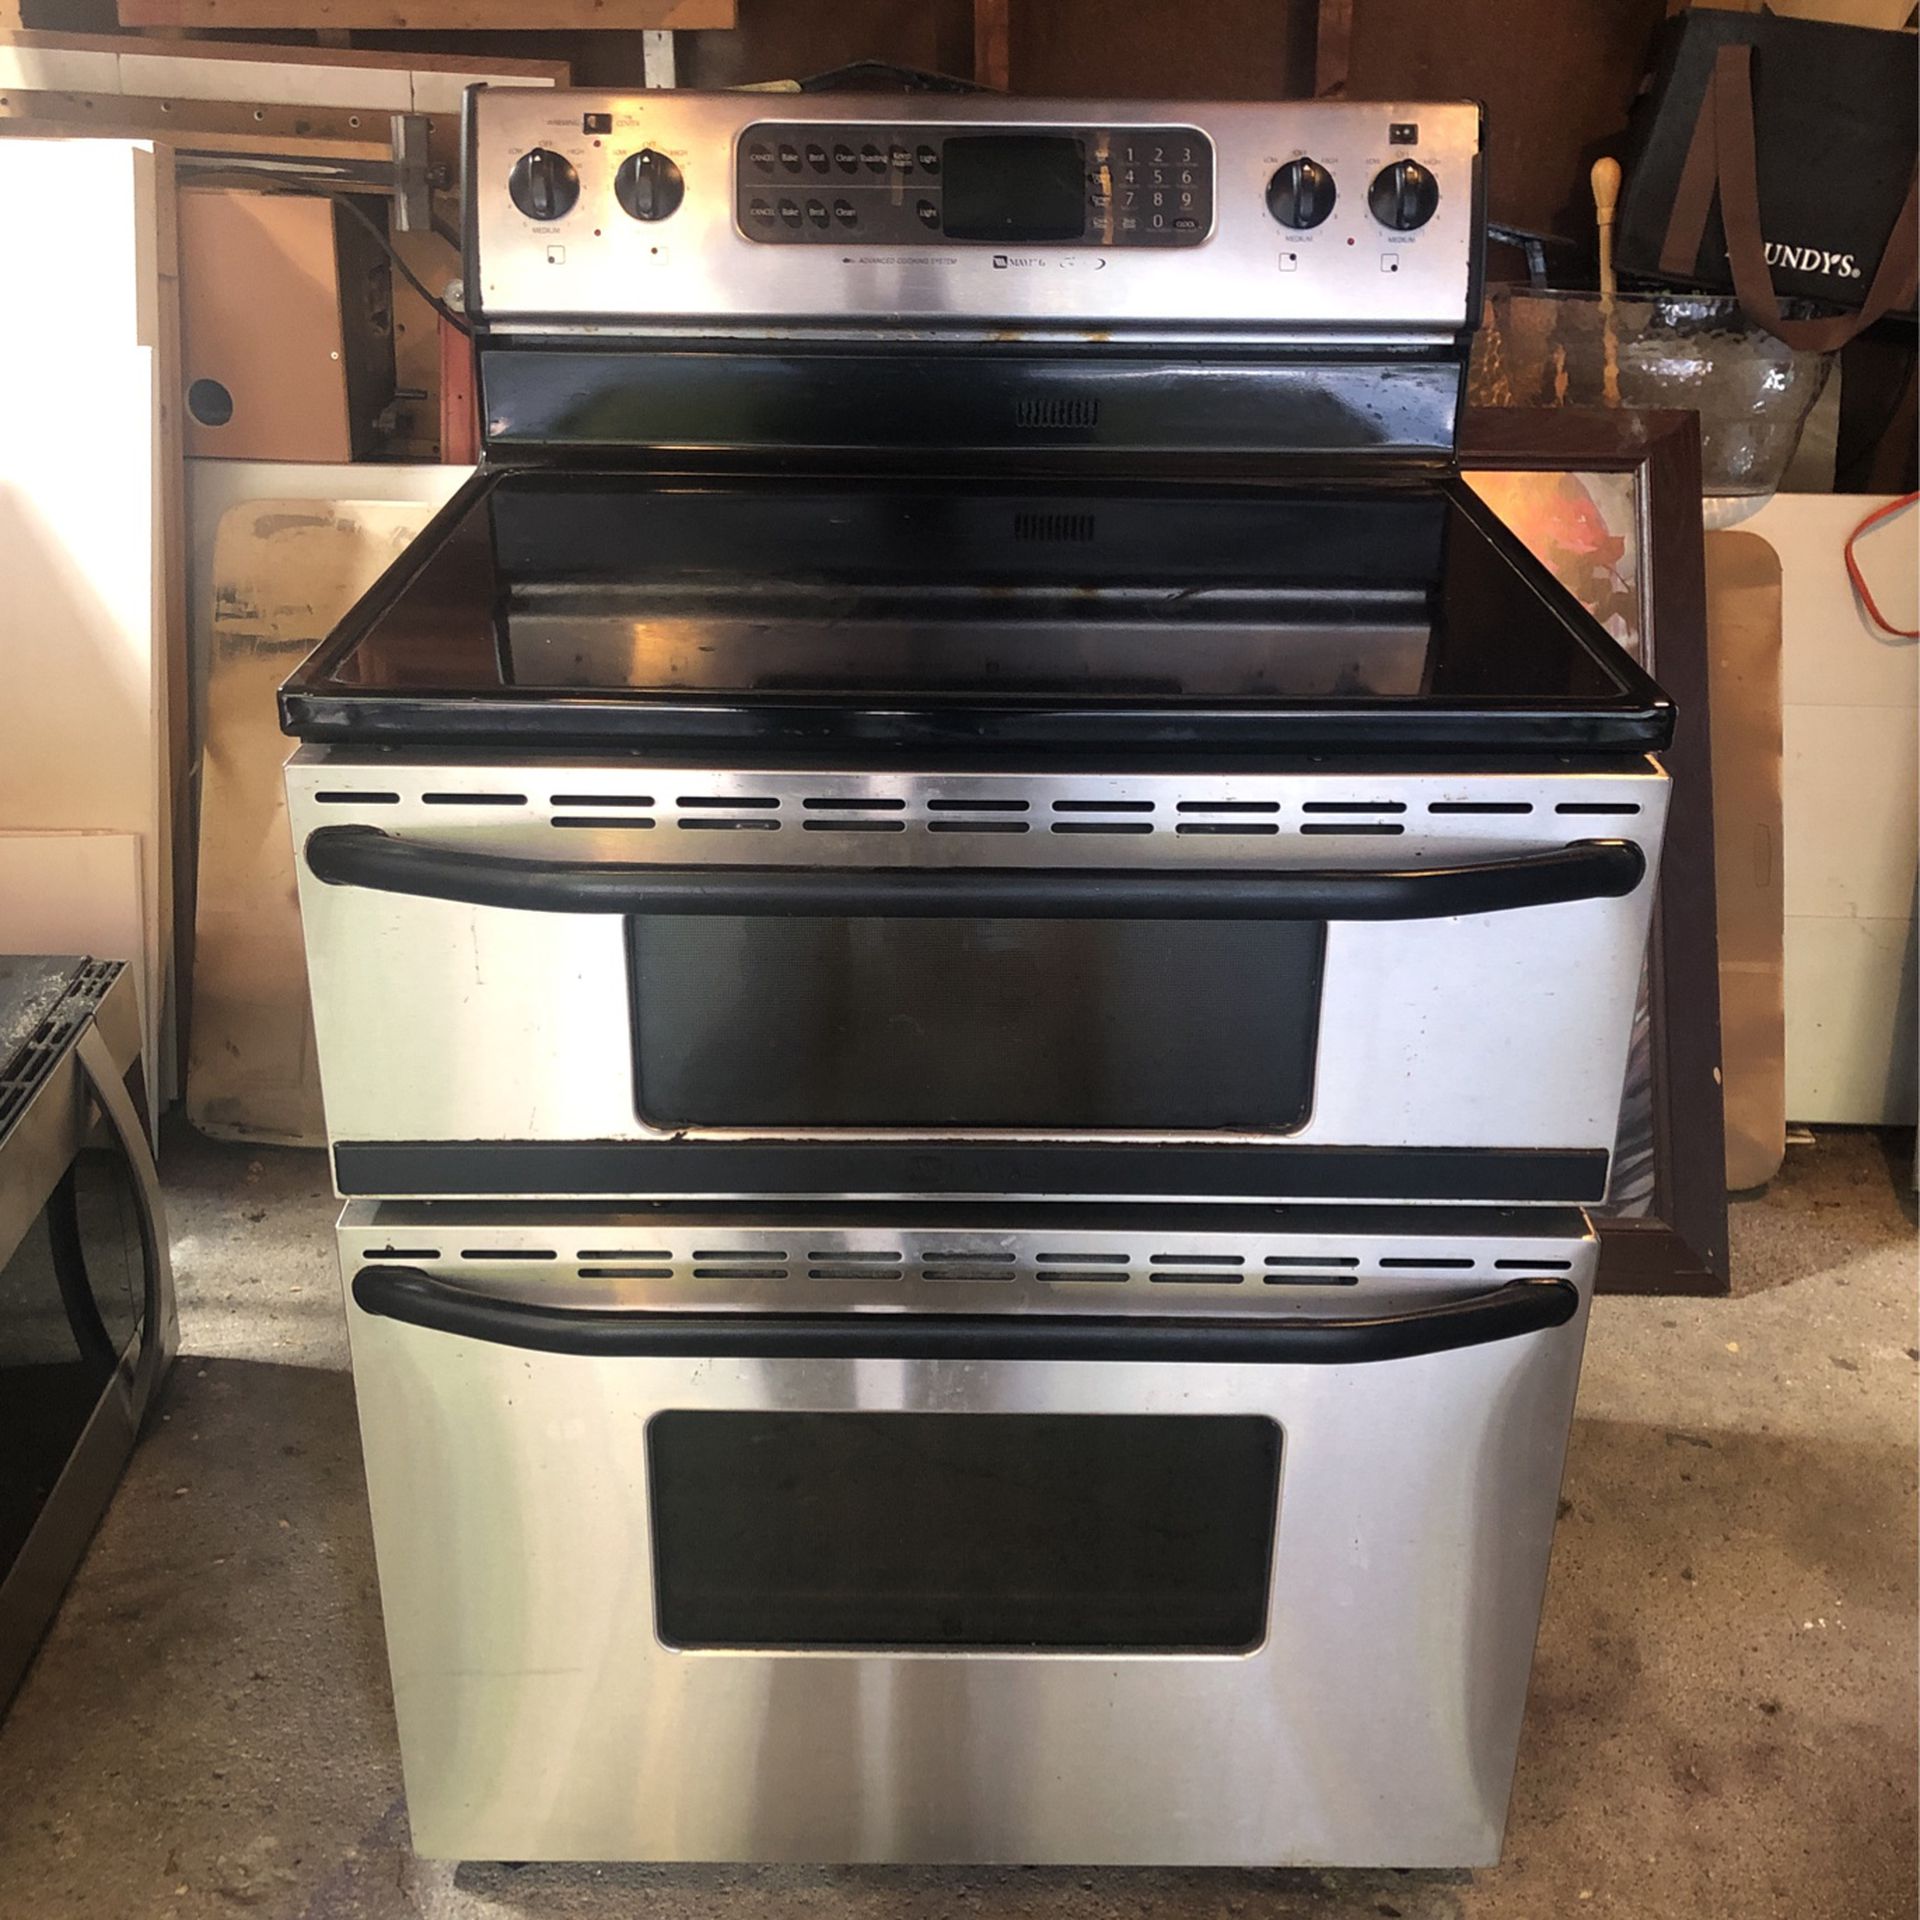 Maytag Glass Top Electric Stove